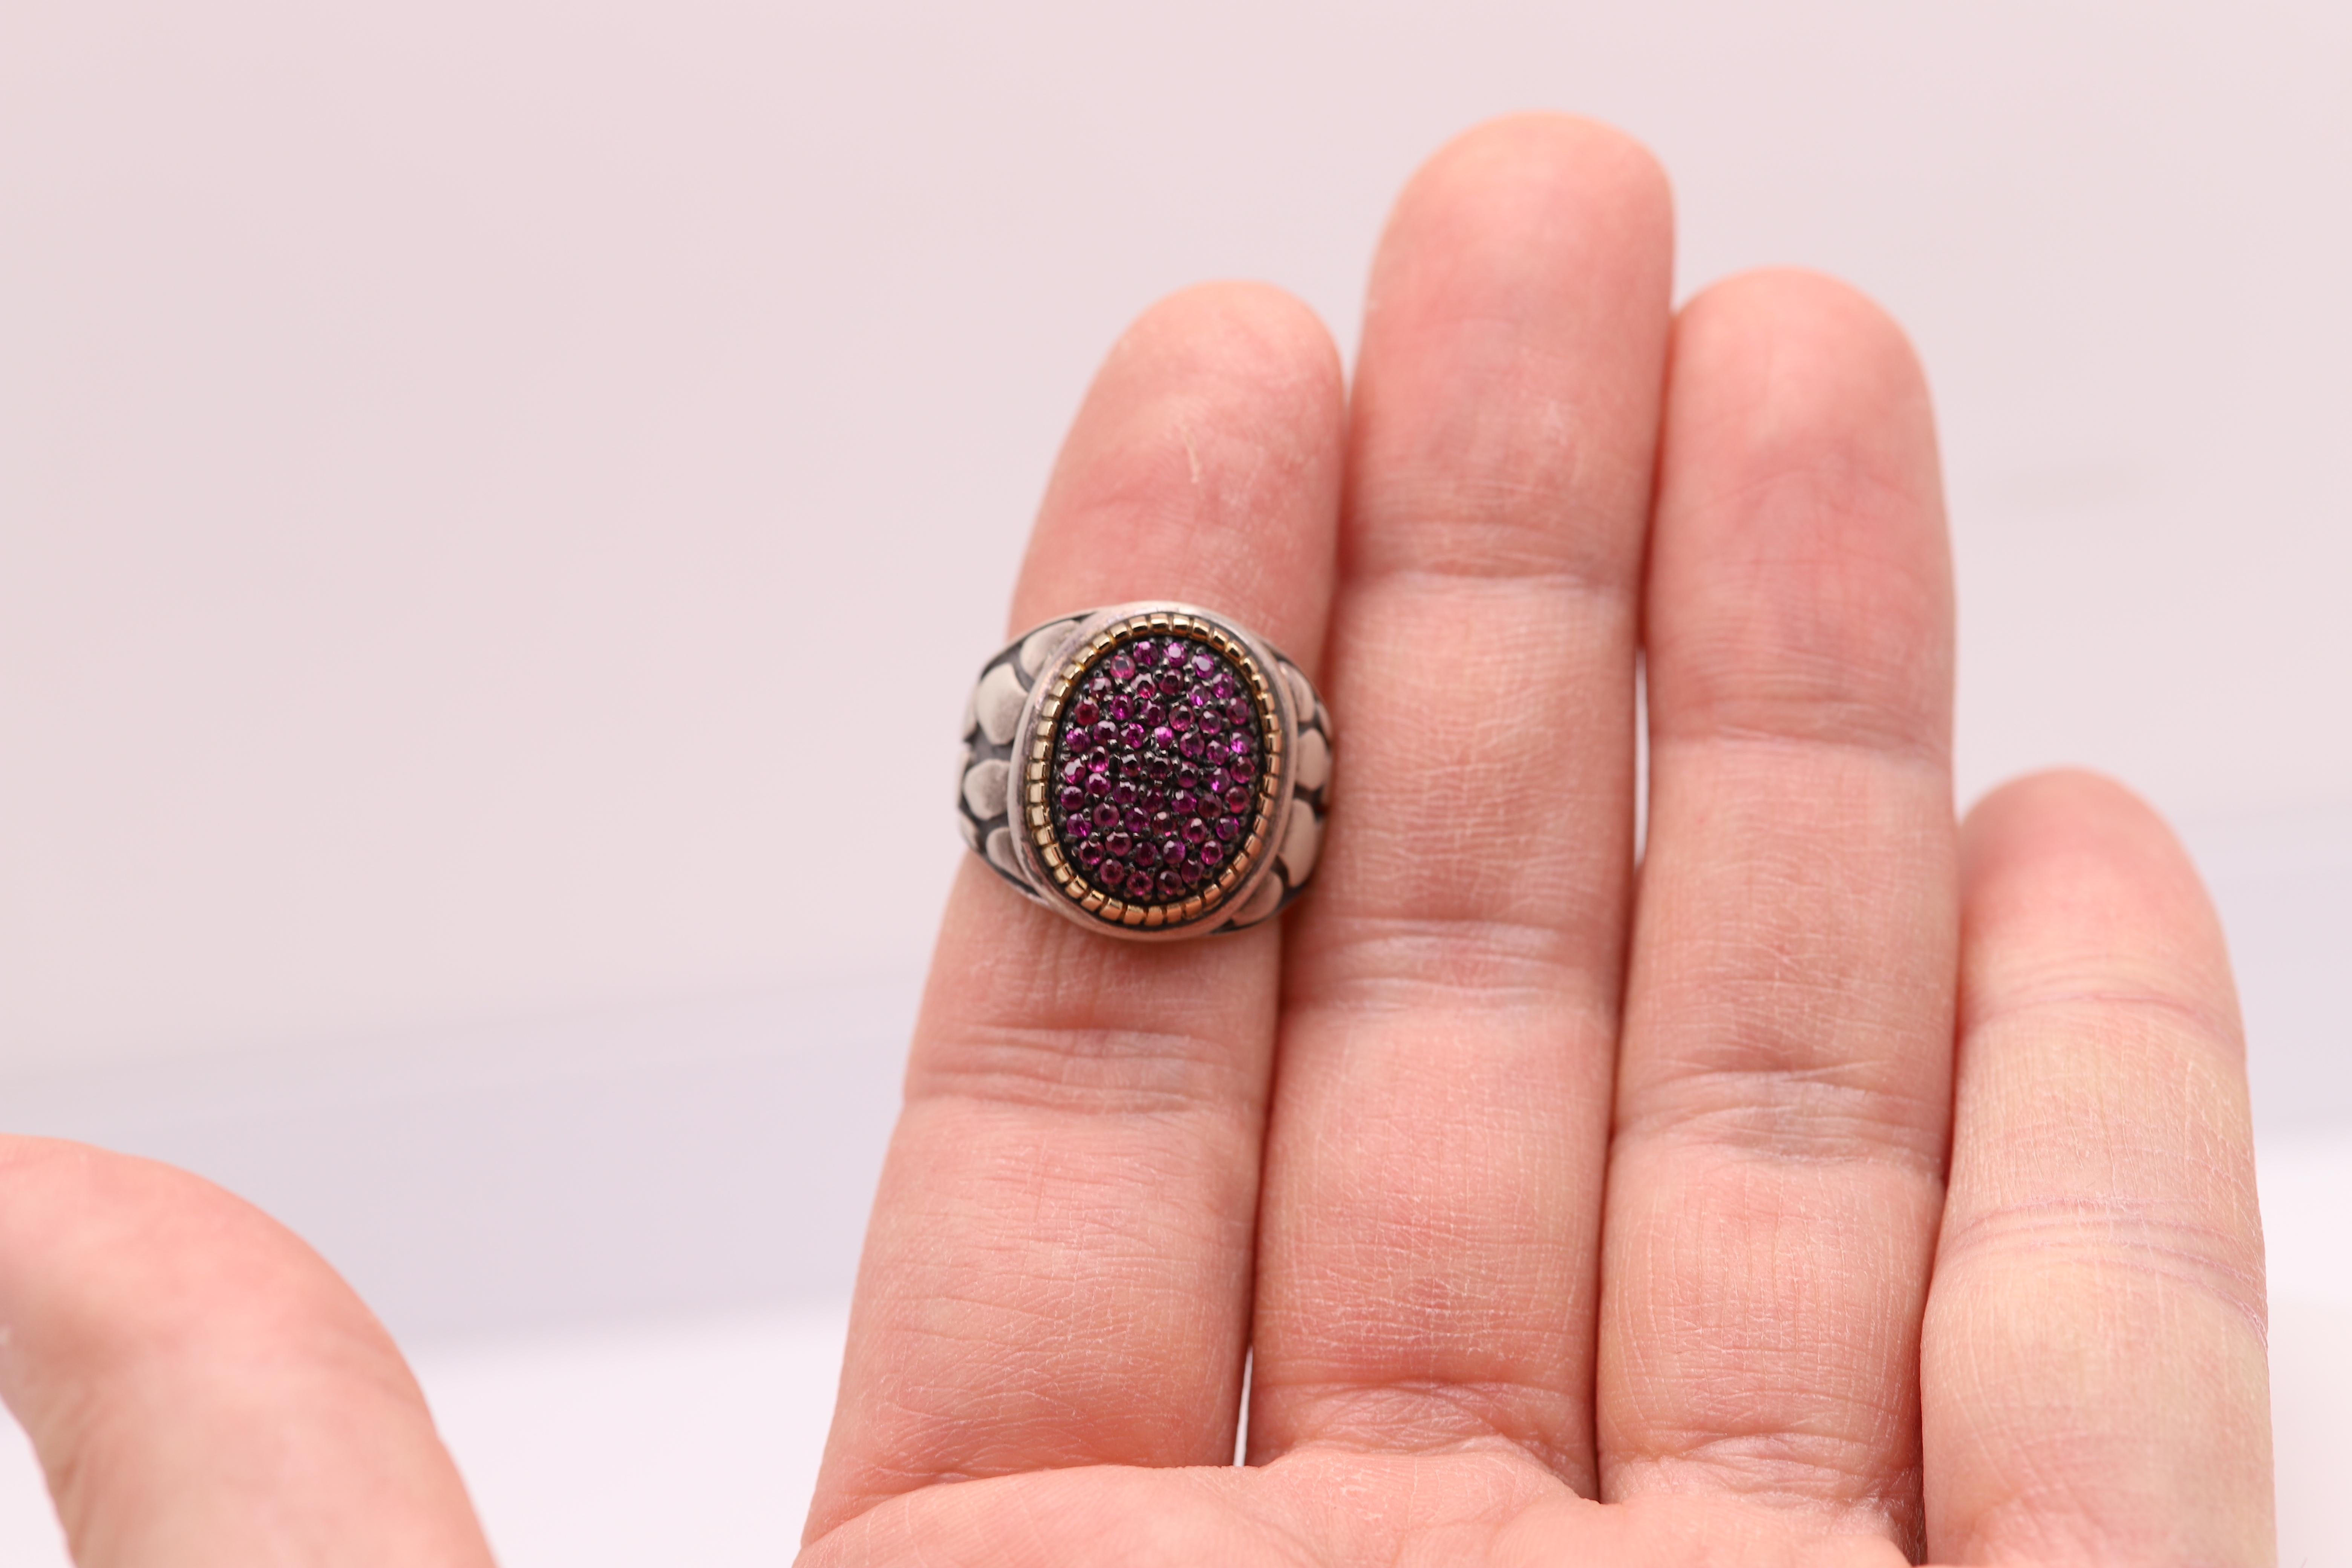 Vintage Brilliant Ring with a Cluster of Natural Ruby Stones
Approx ruby area size 15 x 12 mm
Mostly Sterling Silver 925 and the bezel is solid 18k yellow gold.
Well craftsmanship - made in Italy
Finger size 6.75 (can be re-sized)
Overall weight is